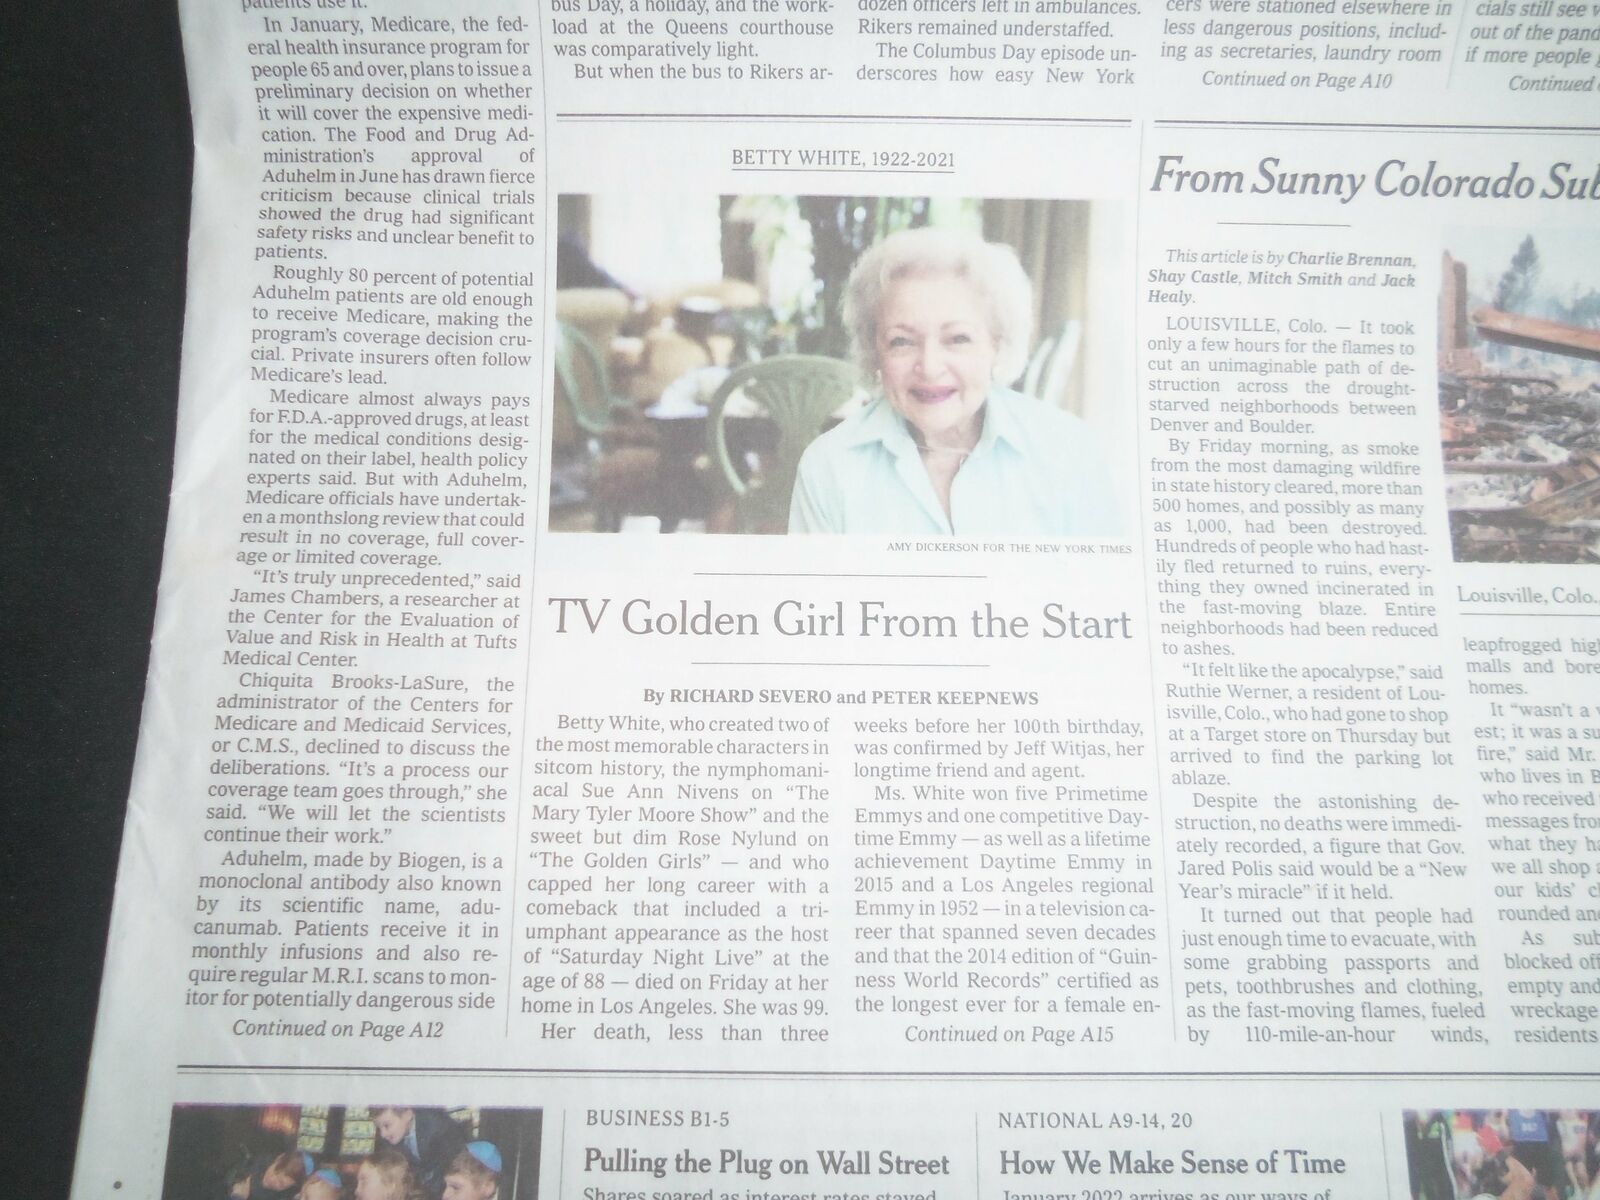 2022 JANUARY 1 NEW YORK TIMES - BETTY WHITE DIED AT AGE 99 (1922-2021)